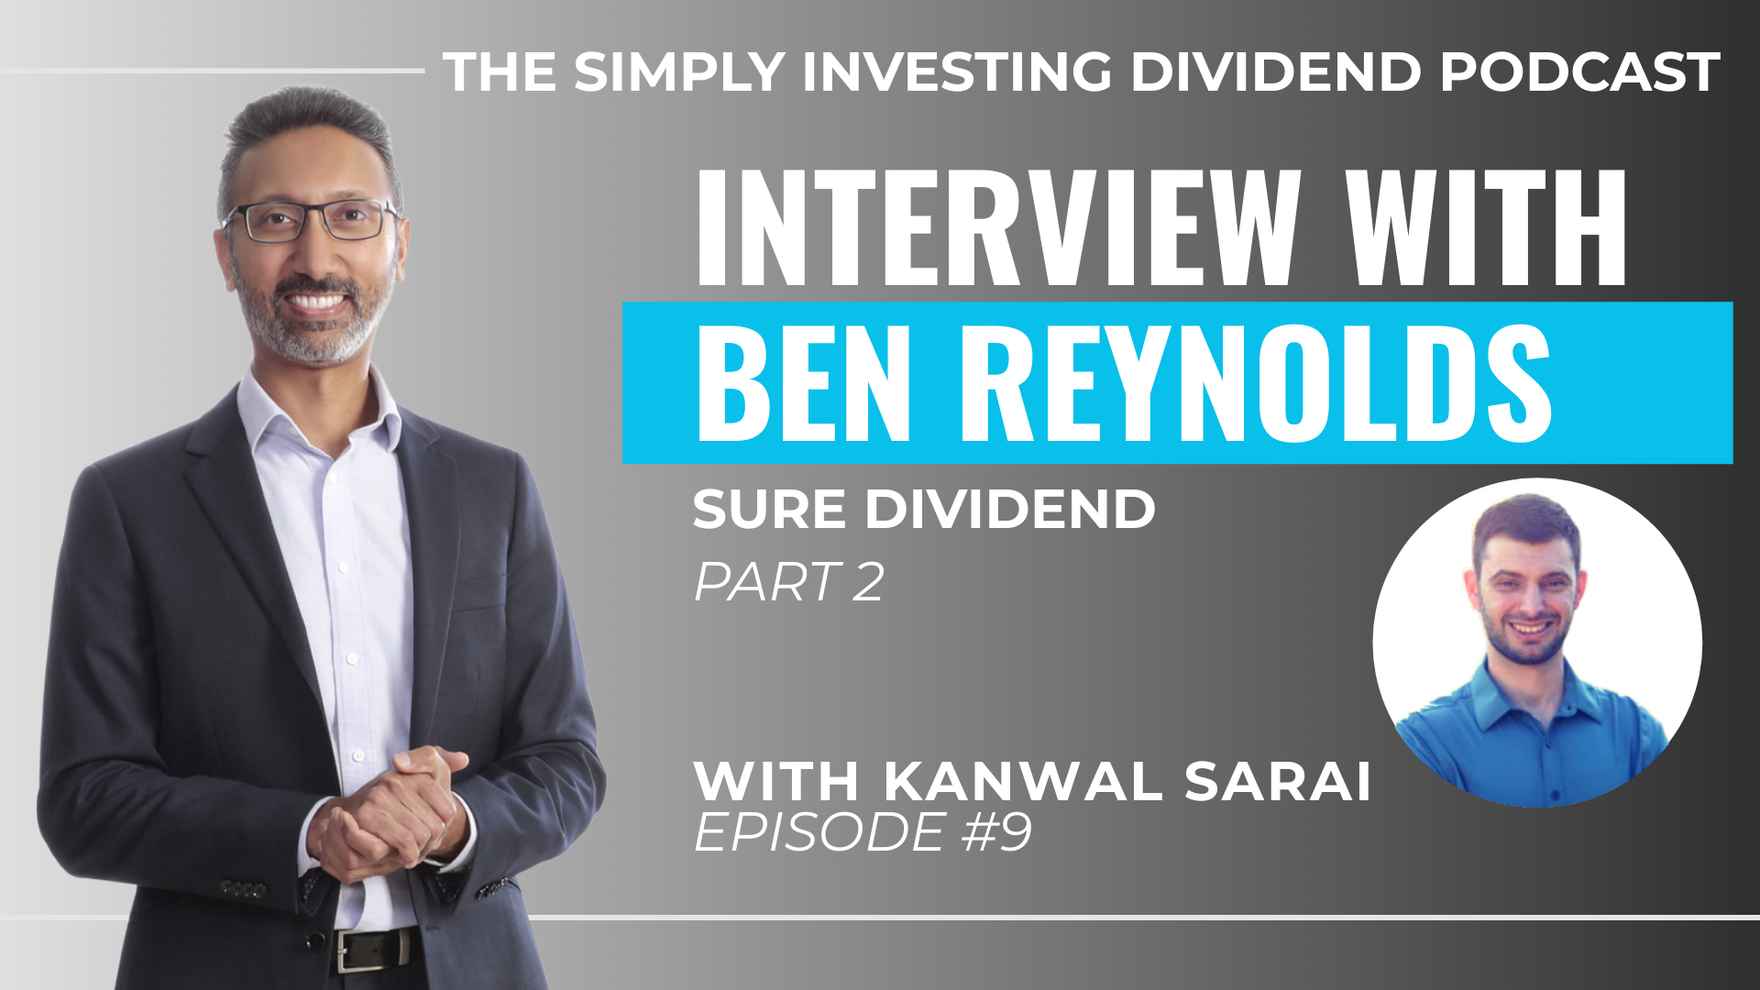 Simply Investing Dividend Podcast Episode 9 - Interview with Ben Reynolds of Sure Dividend (part 2)